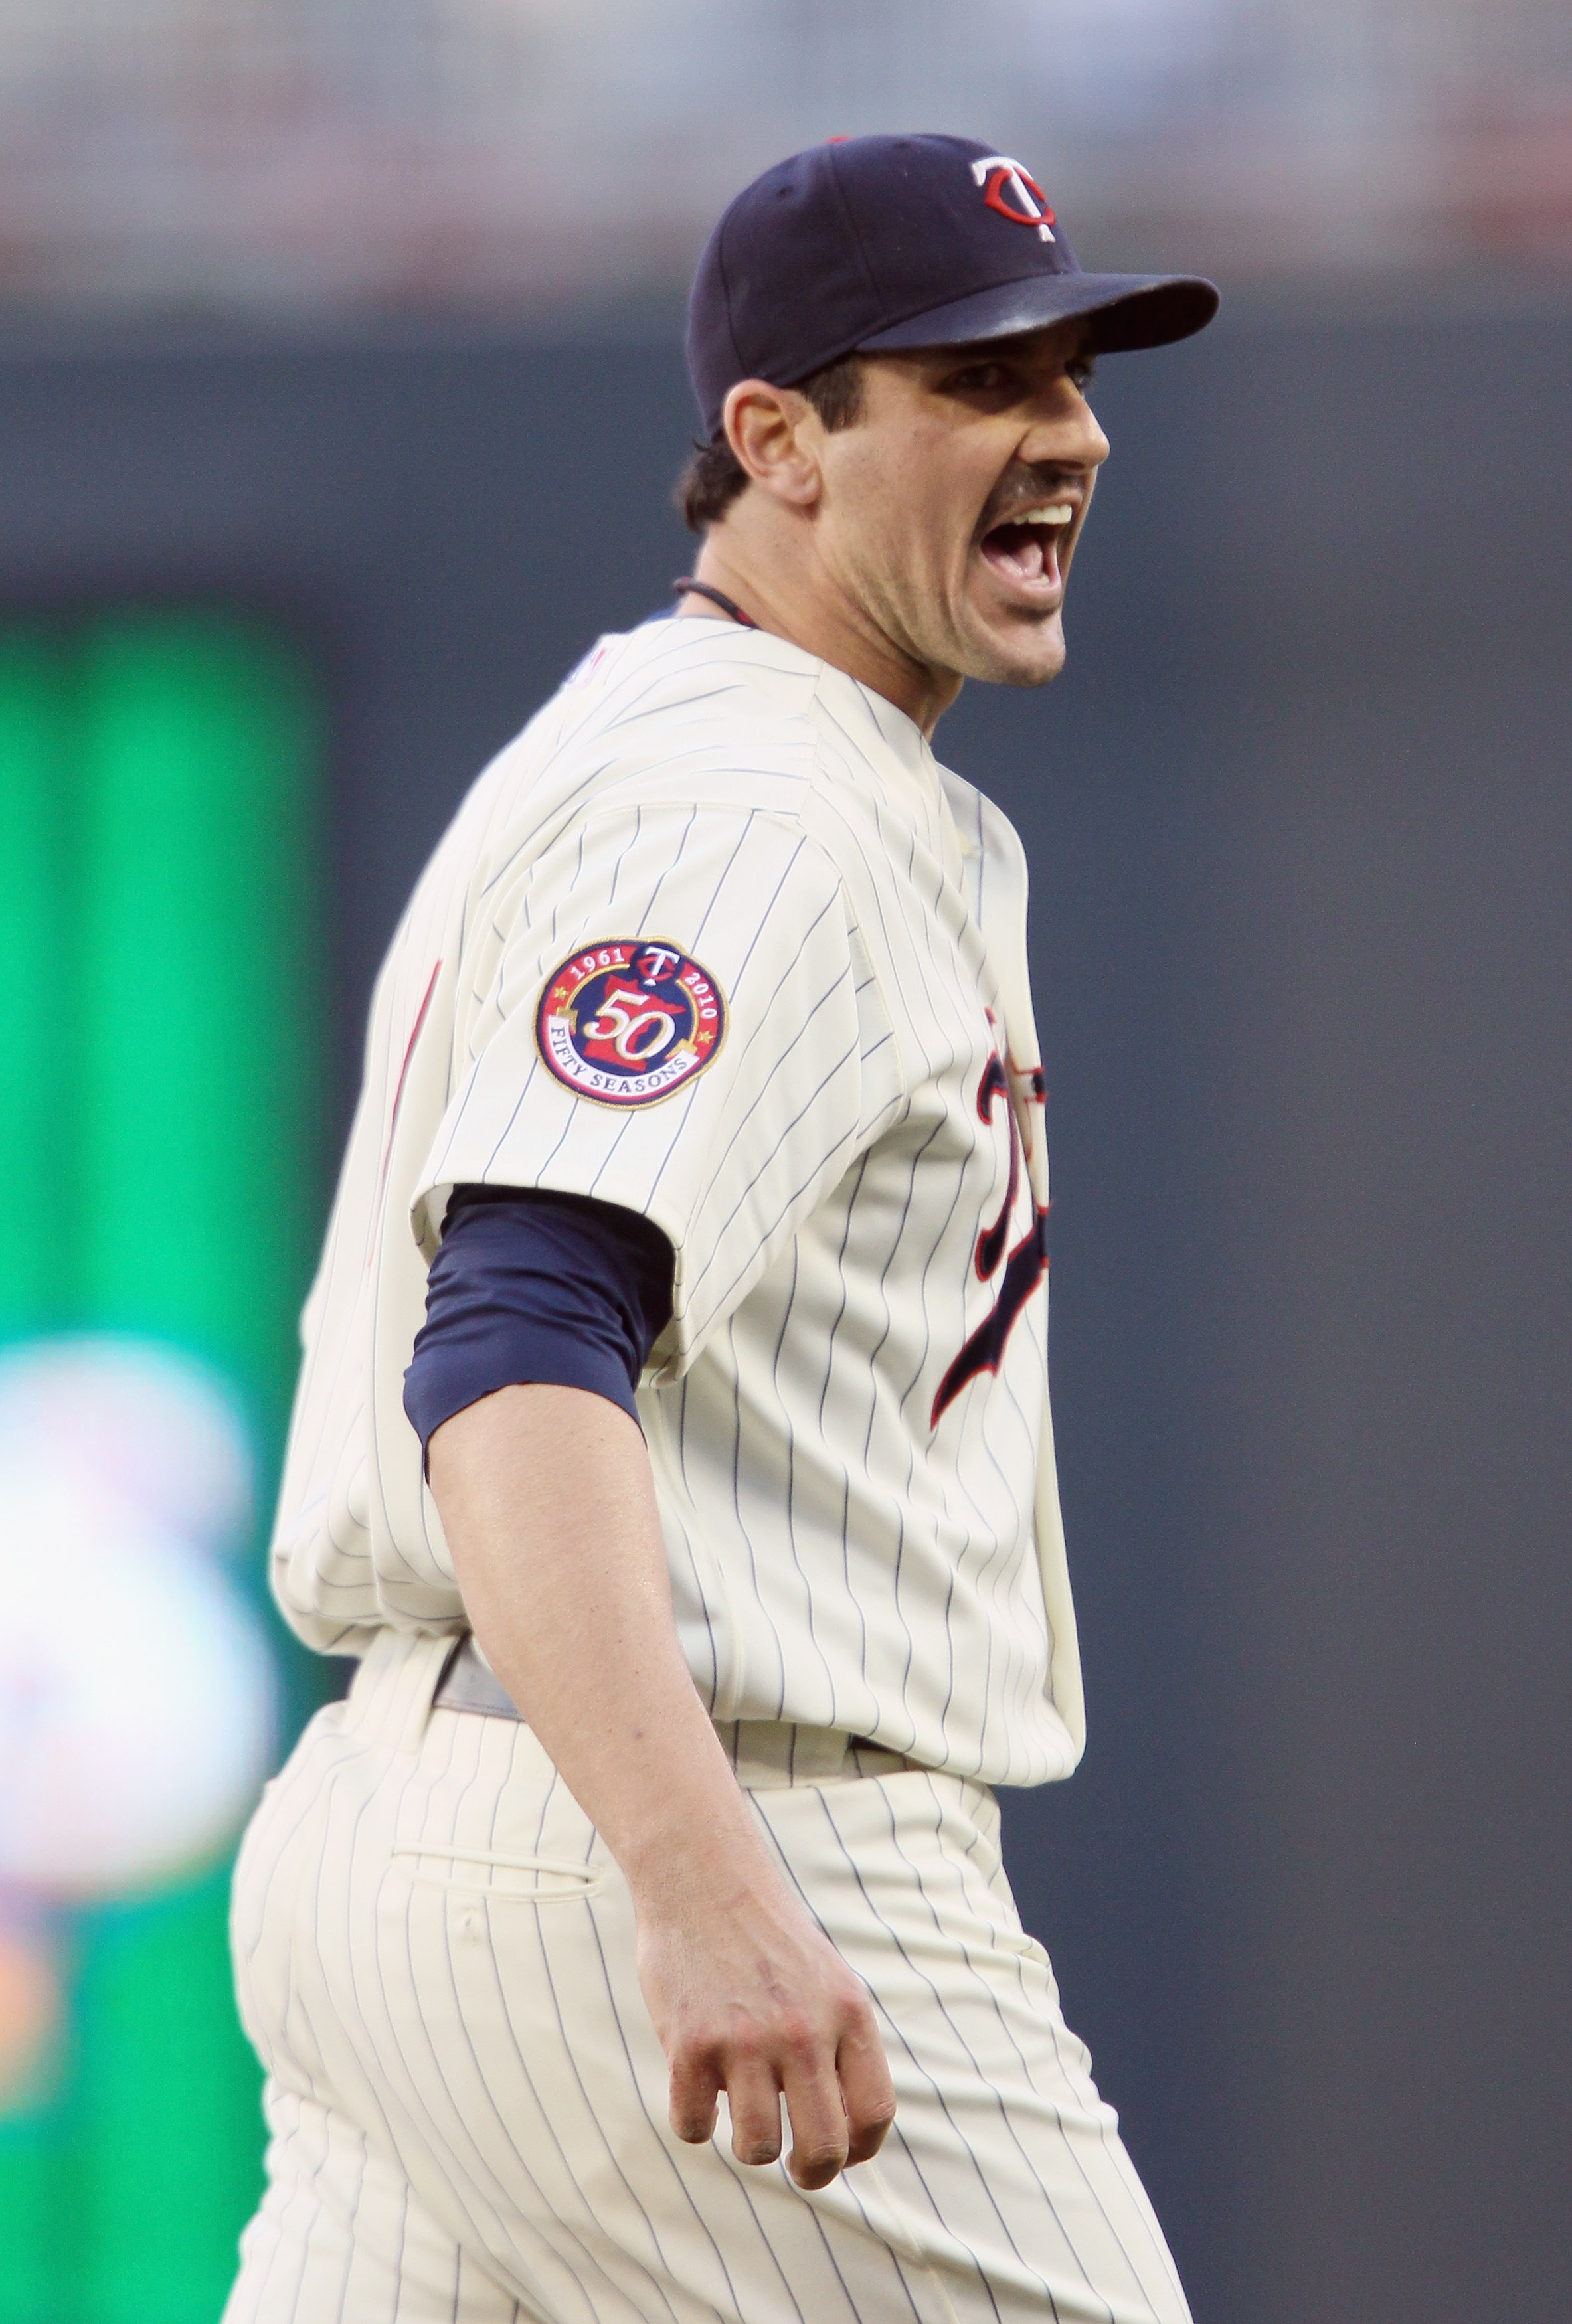 MINNEAPOLIS - OCTOBER 07:  Carl Pavano #48 of the Minnesota Twins celebrates after the third out in the first inning against the New York Yankees during game two of the ALDS on October 7, 2010 at Target Field in Minneapolis, Minnesota.  (Photo by Elsa/Get